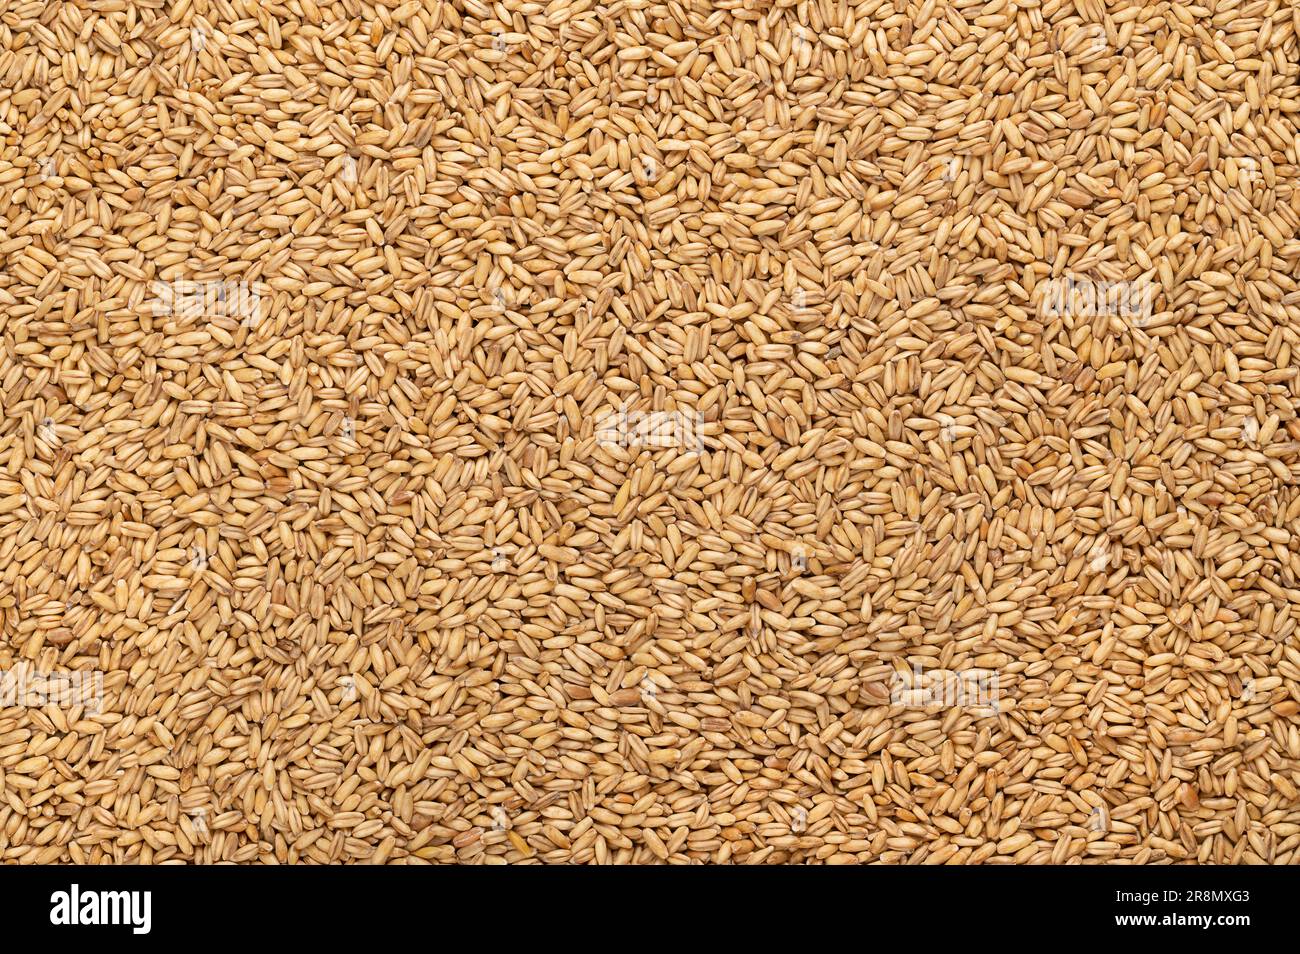 Hulled oats, dried and husked common oat grains, from above. Avena ...